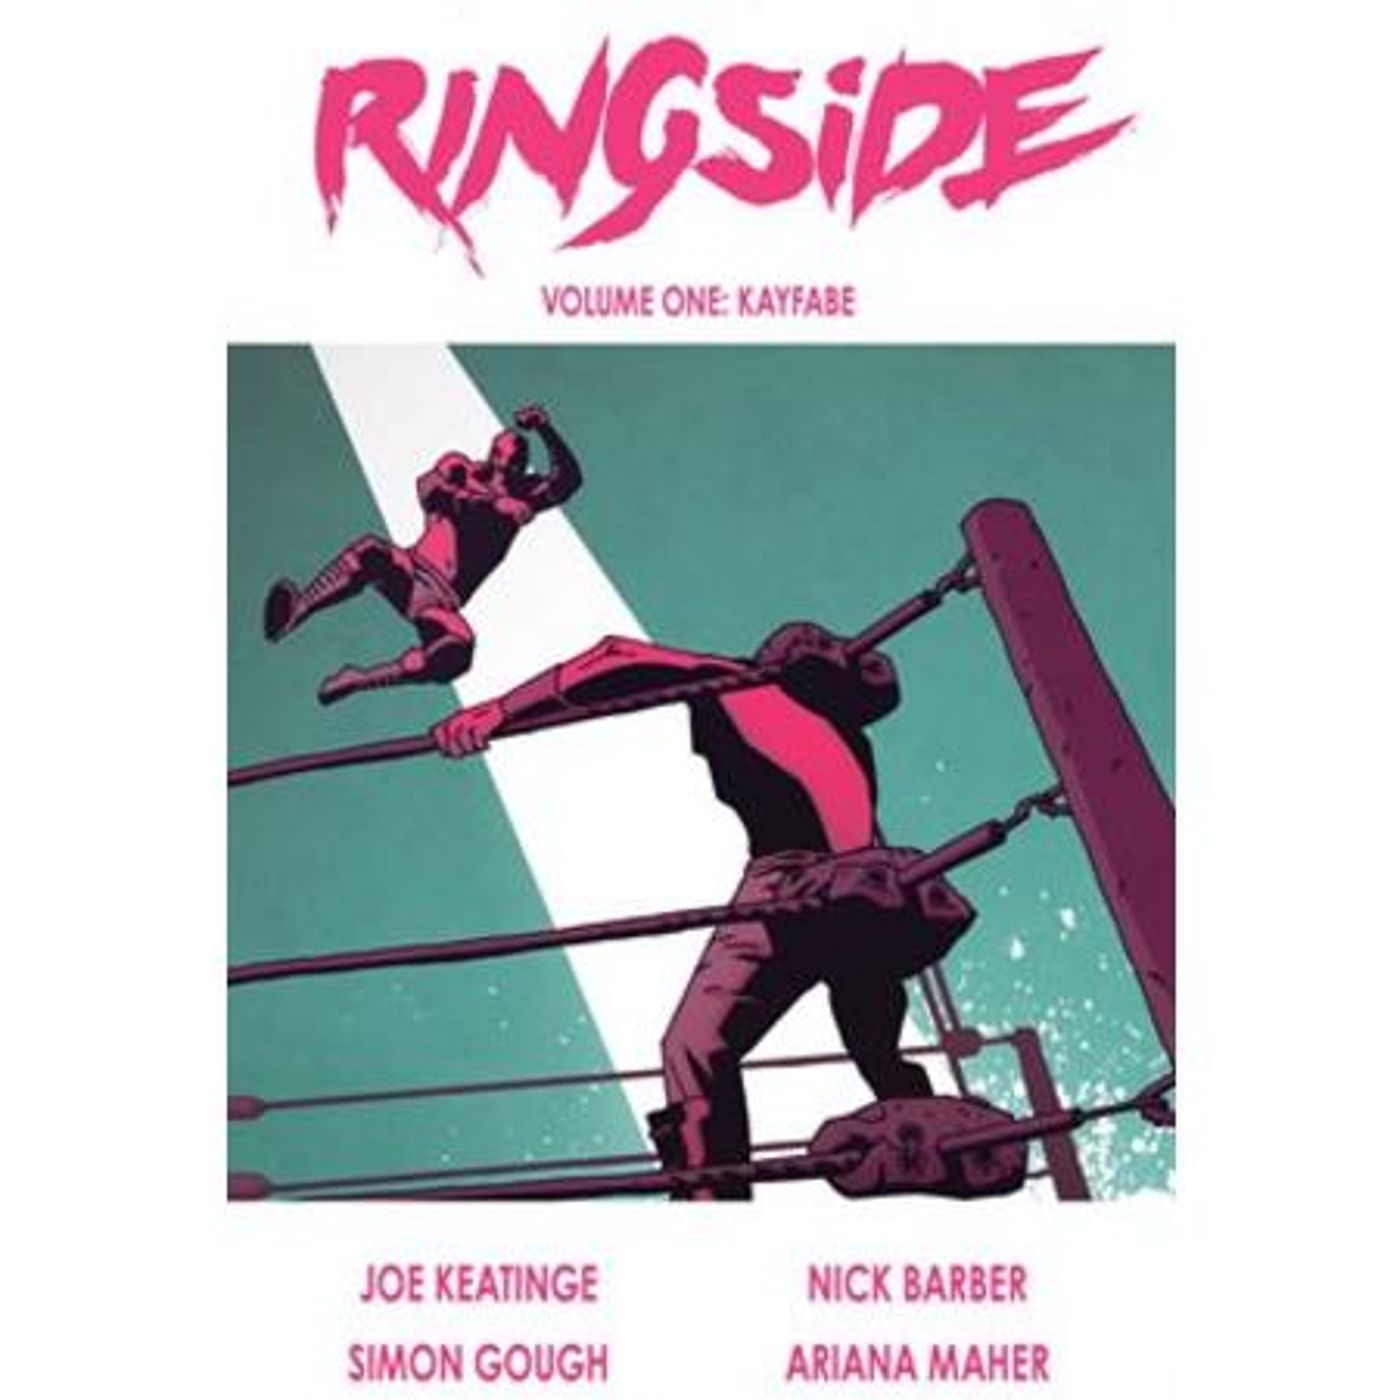 Source Material #157 Ringside Comics: Issues 1-5 (Image, 2016)